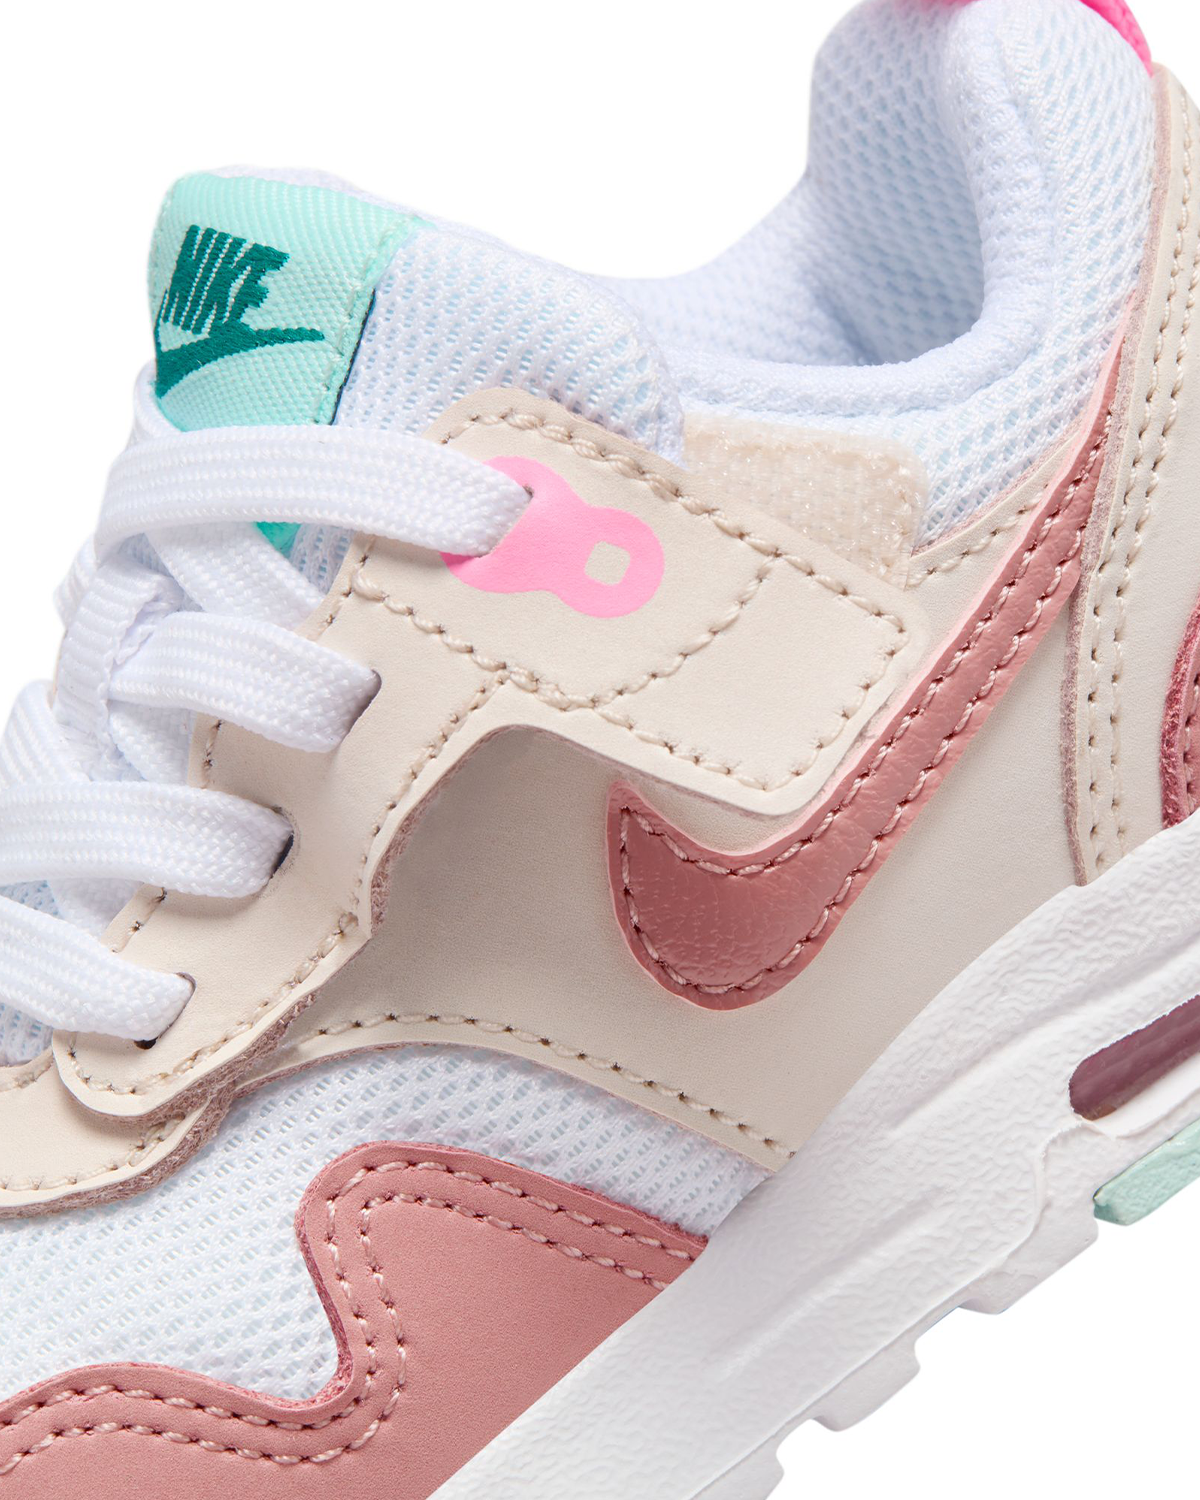 TD Air Max 1 Easyon White/Red Stardust/Guava Ice/Pink Spell